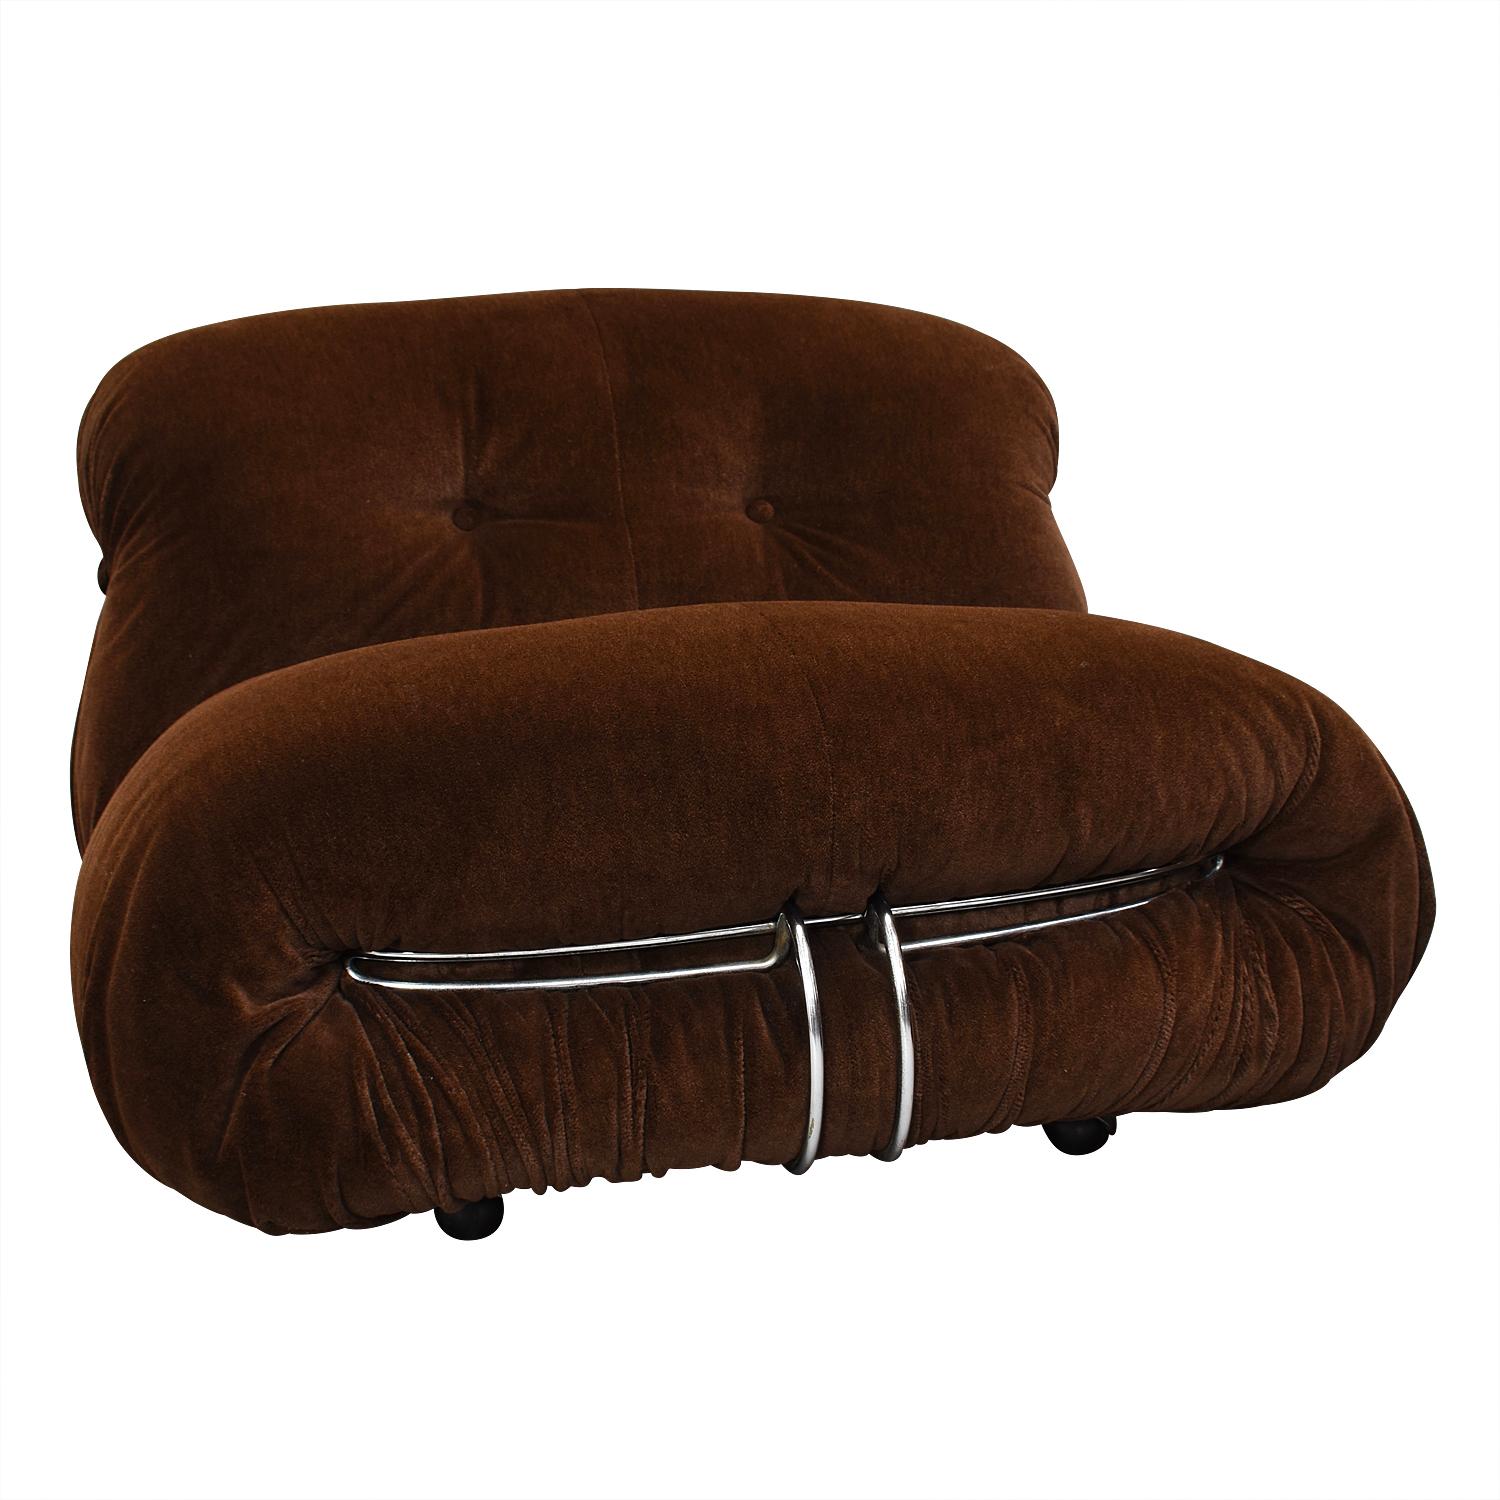 1 Soriana chair by Afra and Tobia Scarpa for Cassina, Italy, circa 1970. 
The chair still has the original dark brown Mohair velvet and remains in very good condition, certainly for it's age.

Original dark brown Angora goat Mohair velvet